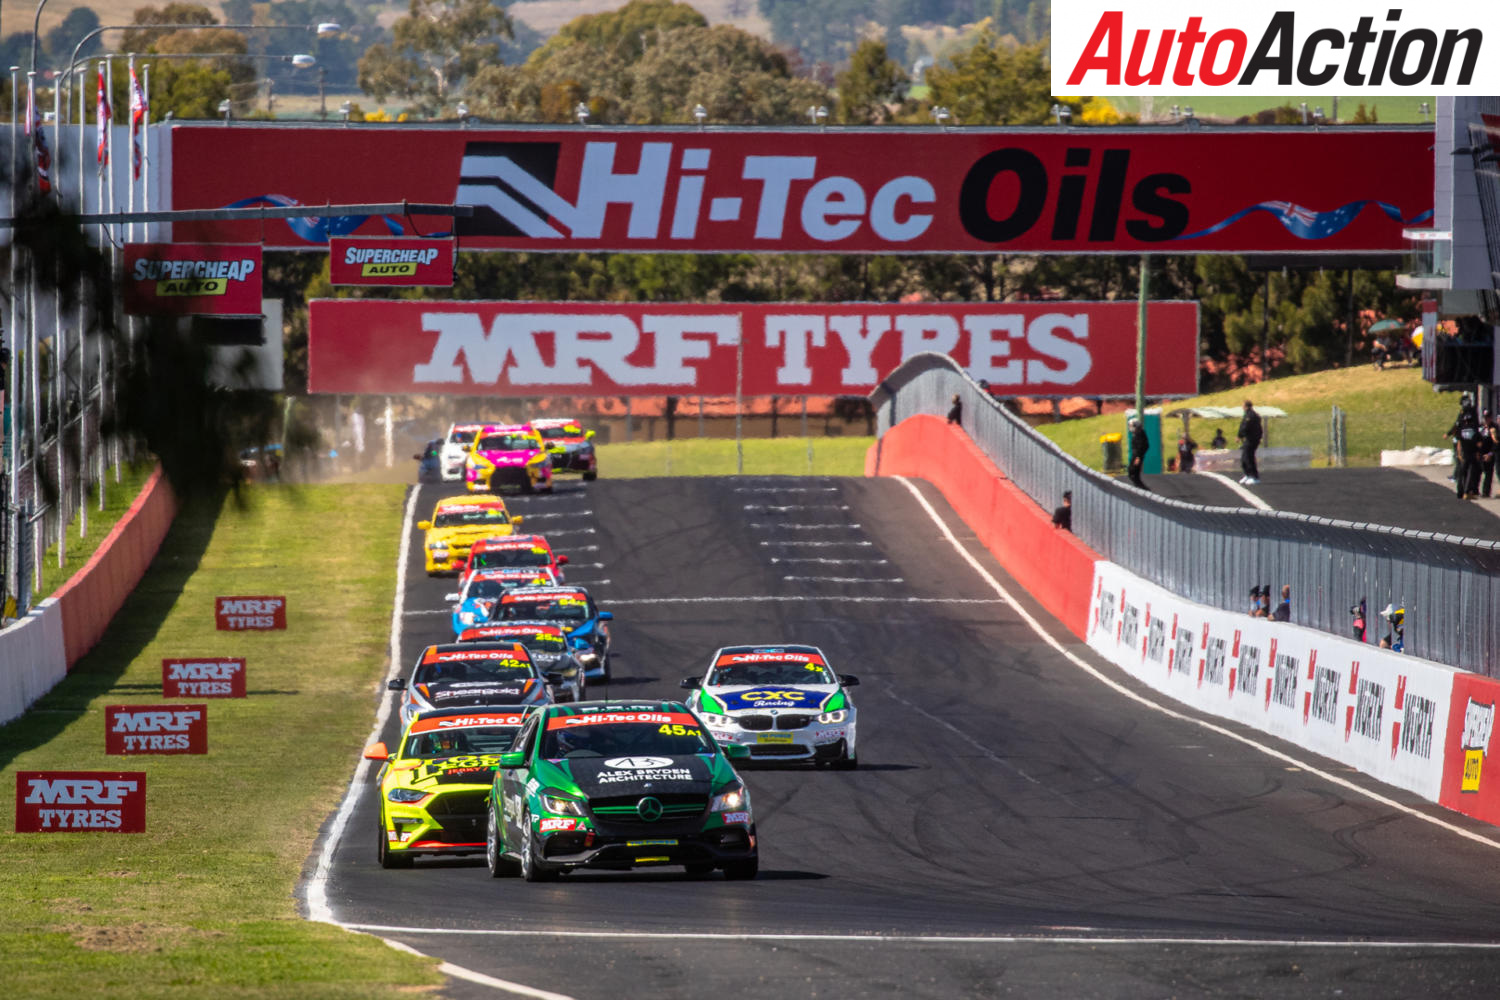 Michael Sheargold and Ollie Shannon return to defend Bathurst 6 Hour class title - Image: InSyde Media